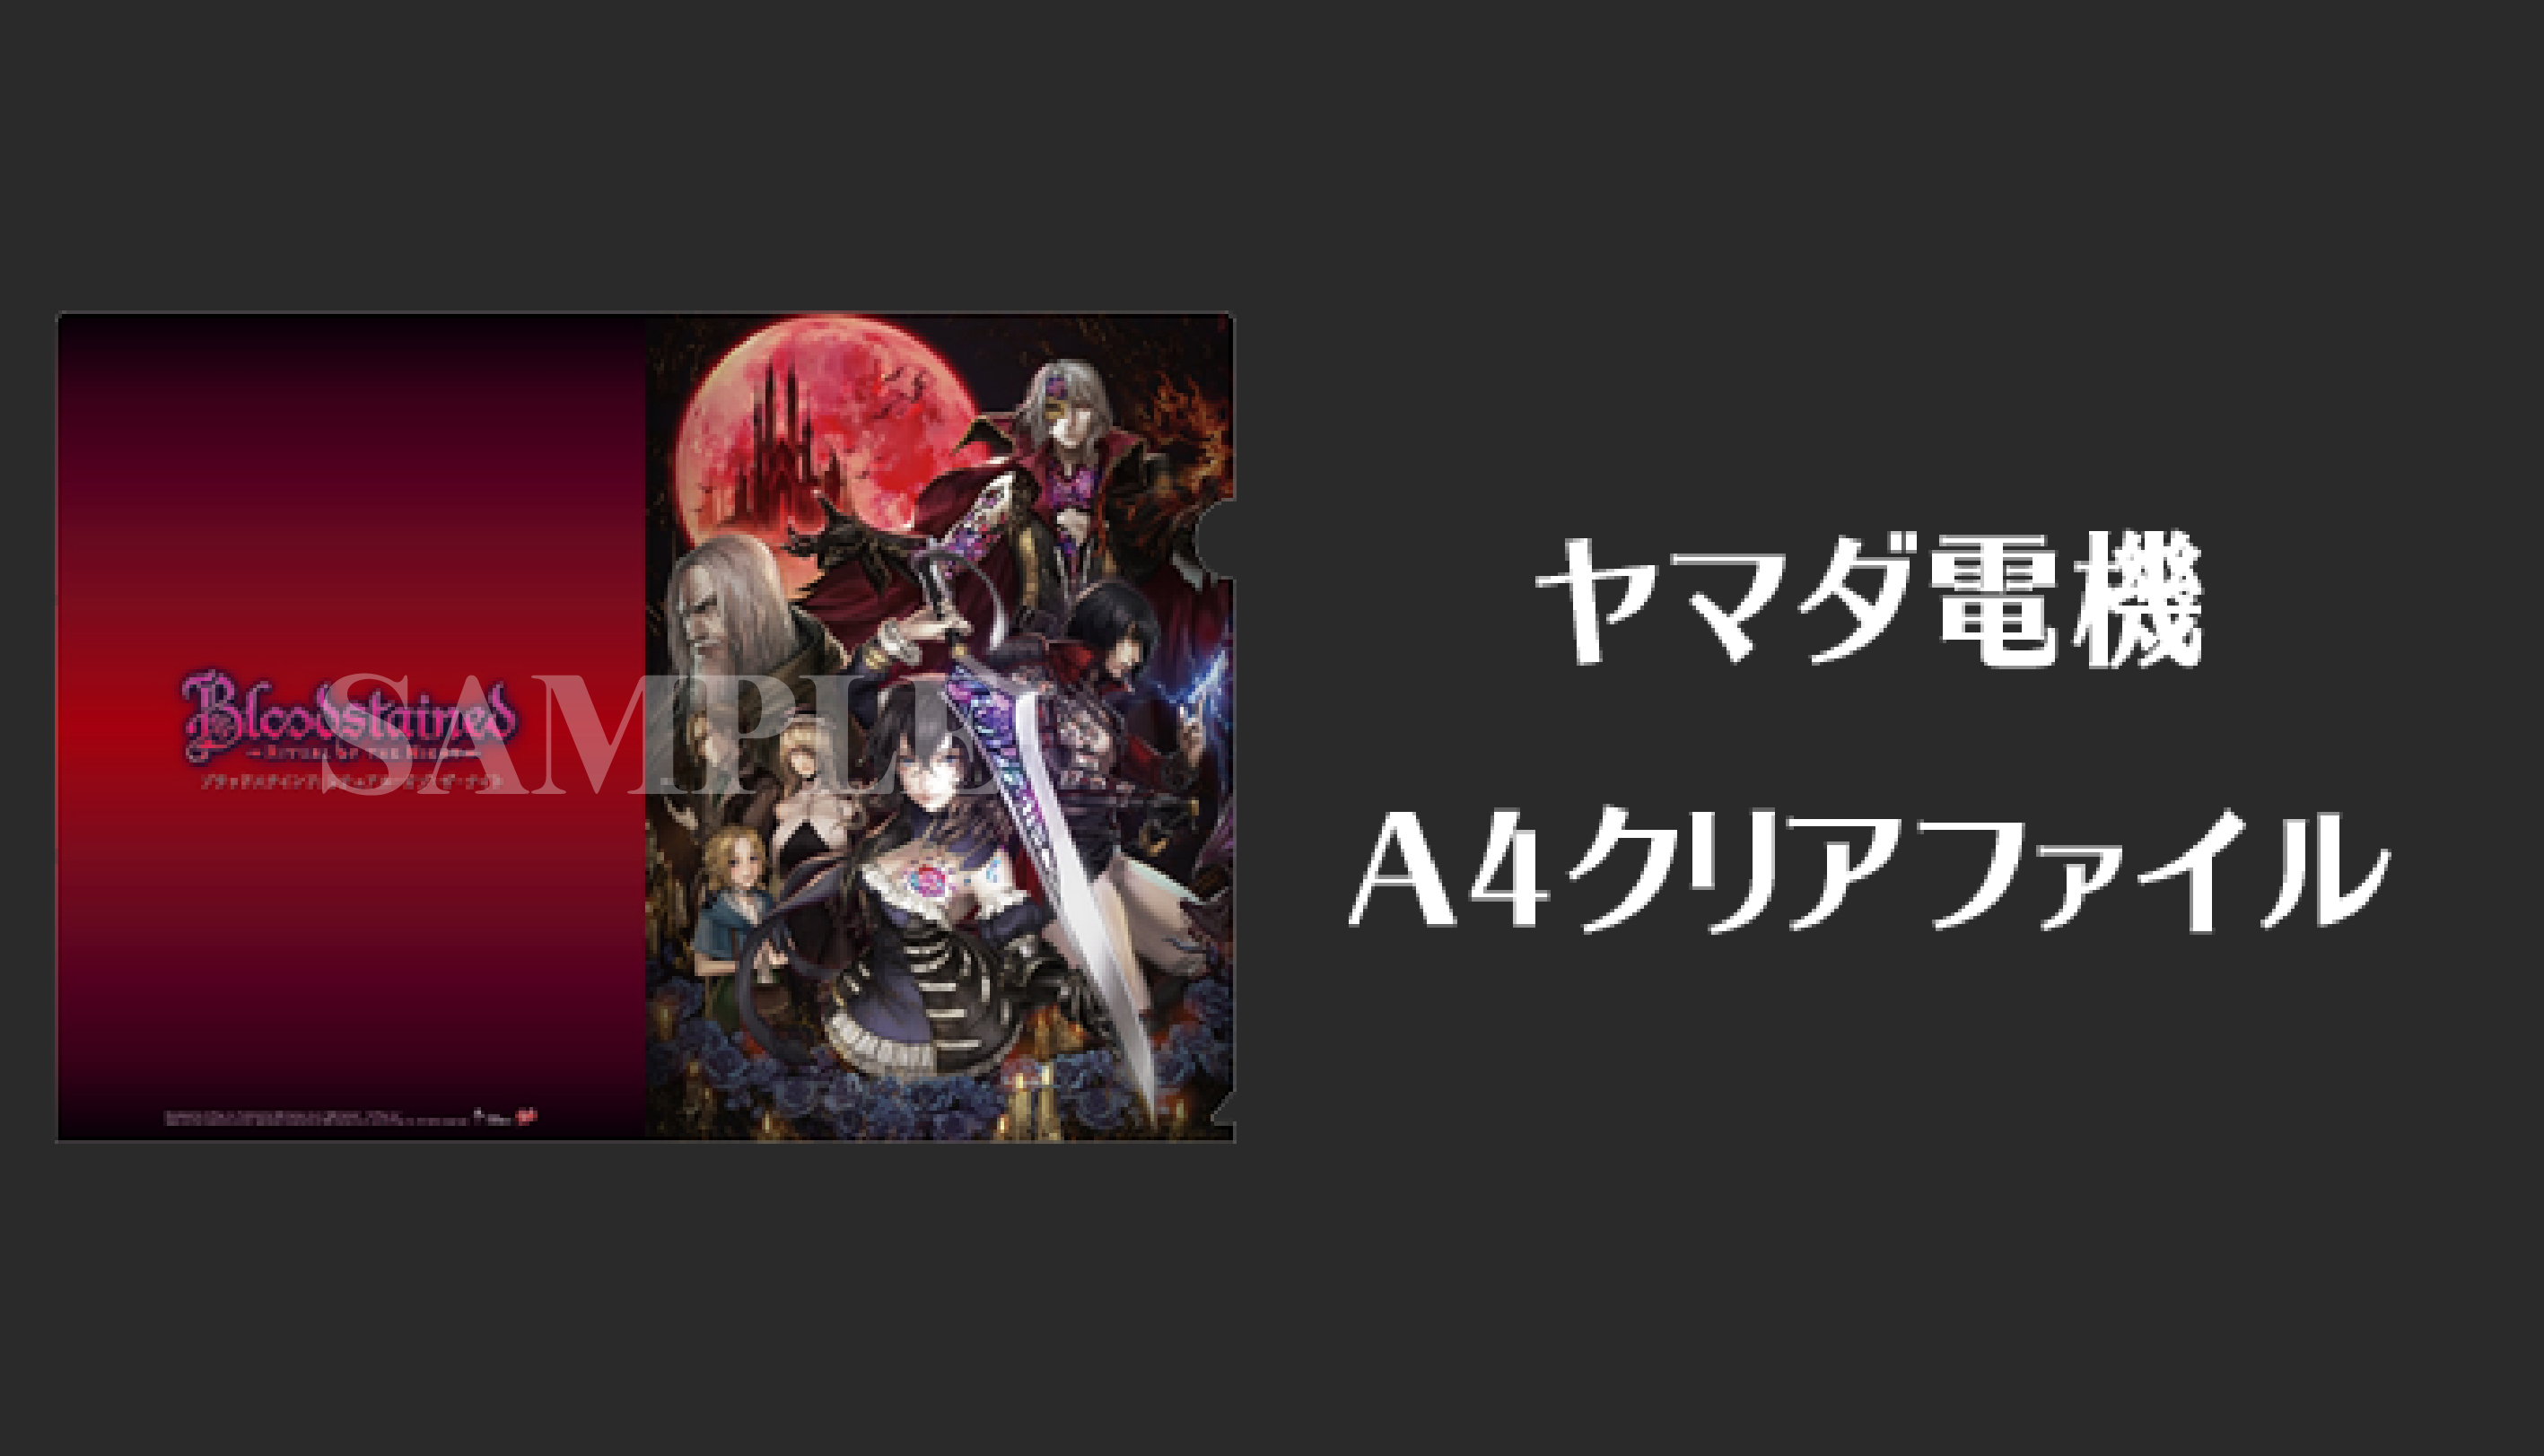 Bloodstained Ritual Of The Night 公式サイト Gse